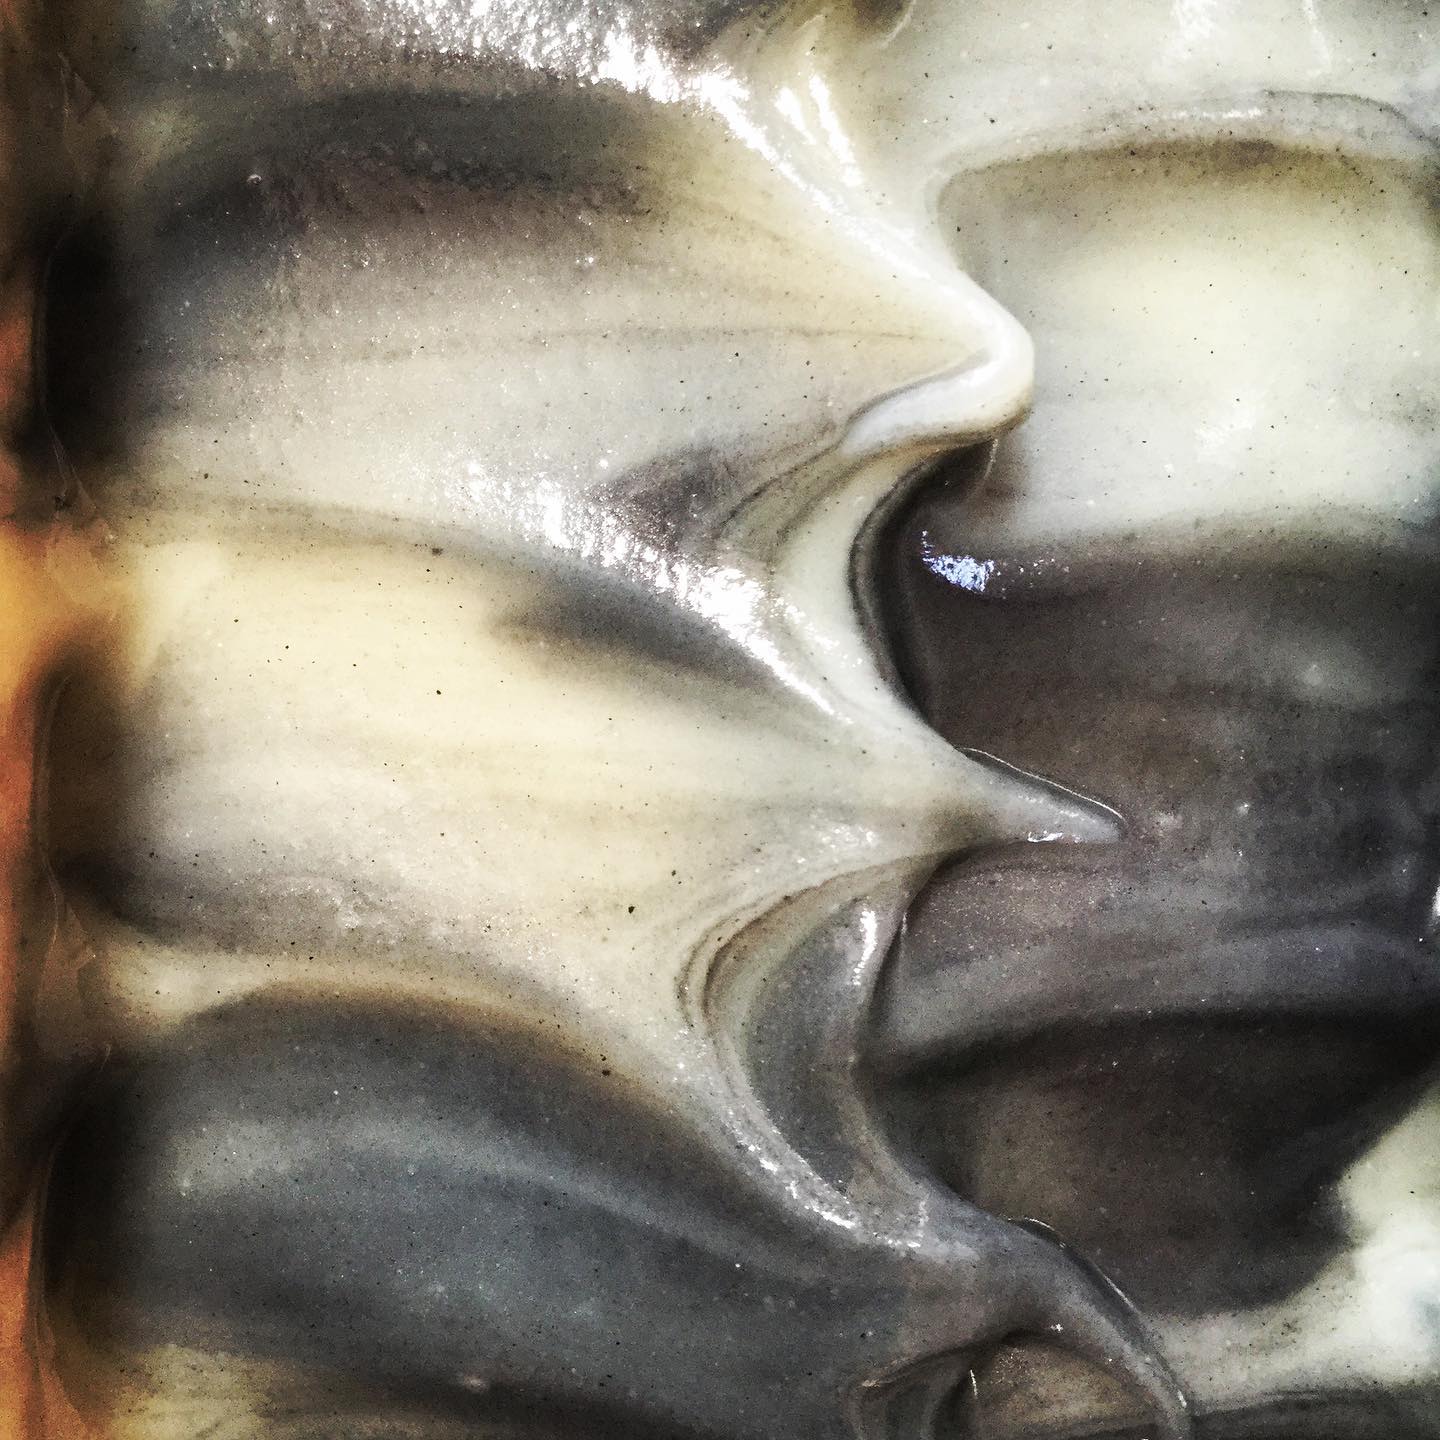 Glossy just poured texture of the top of a black and white marbled soap